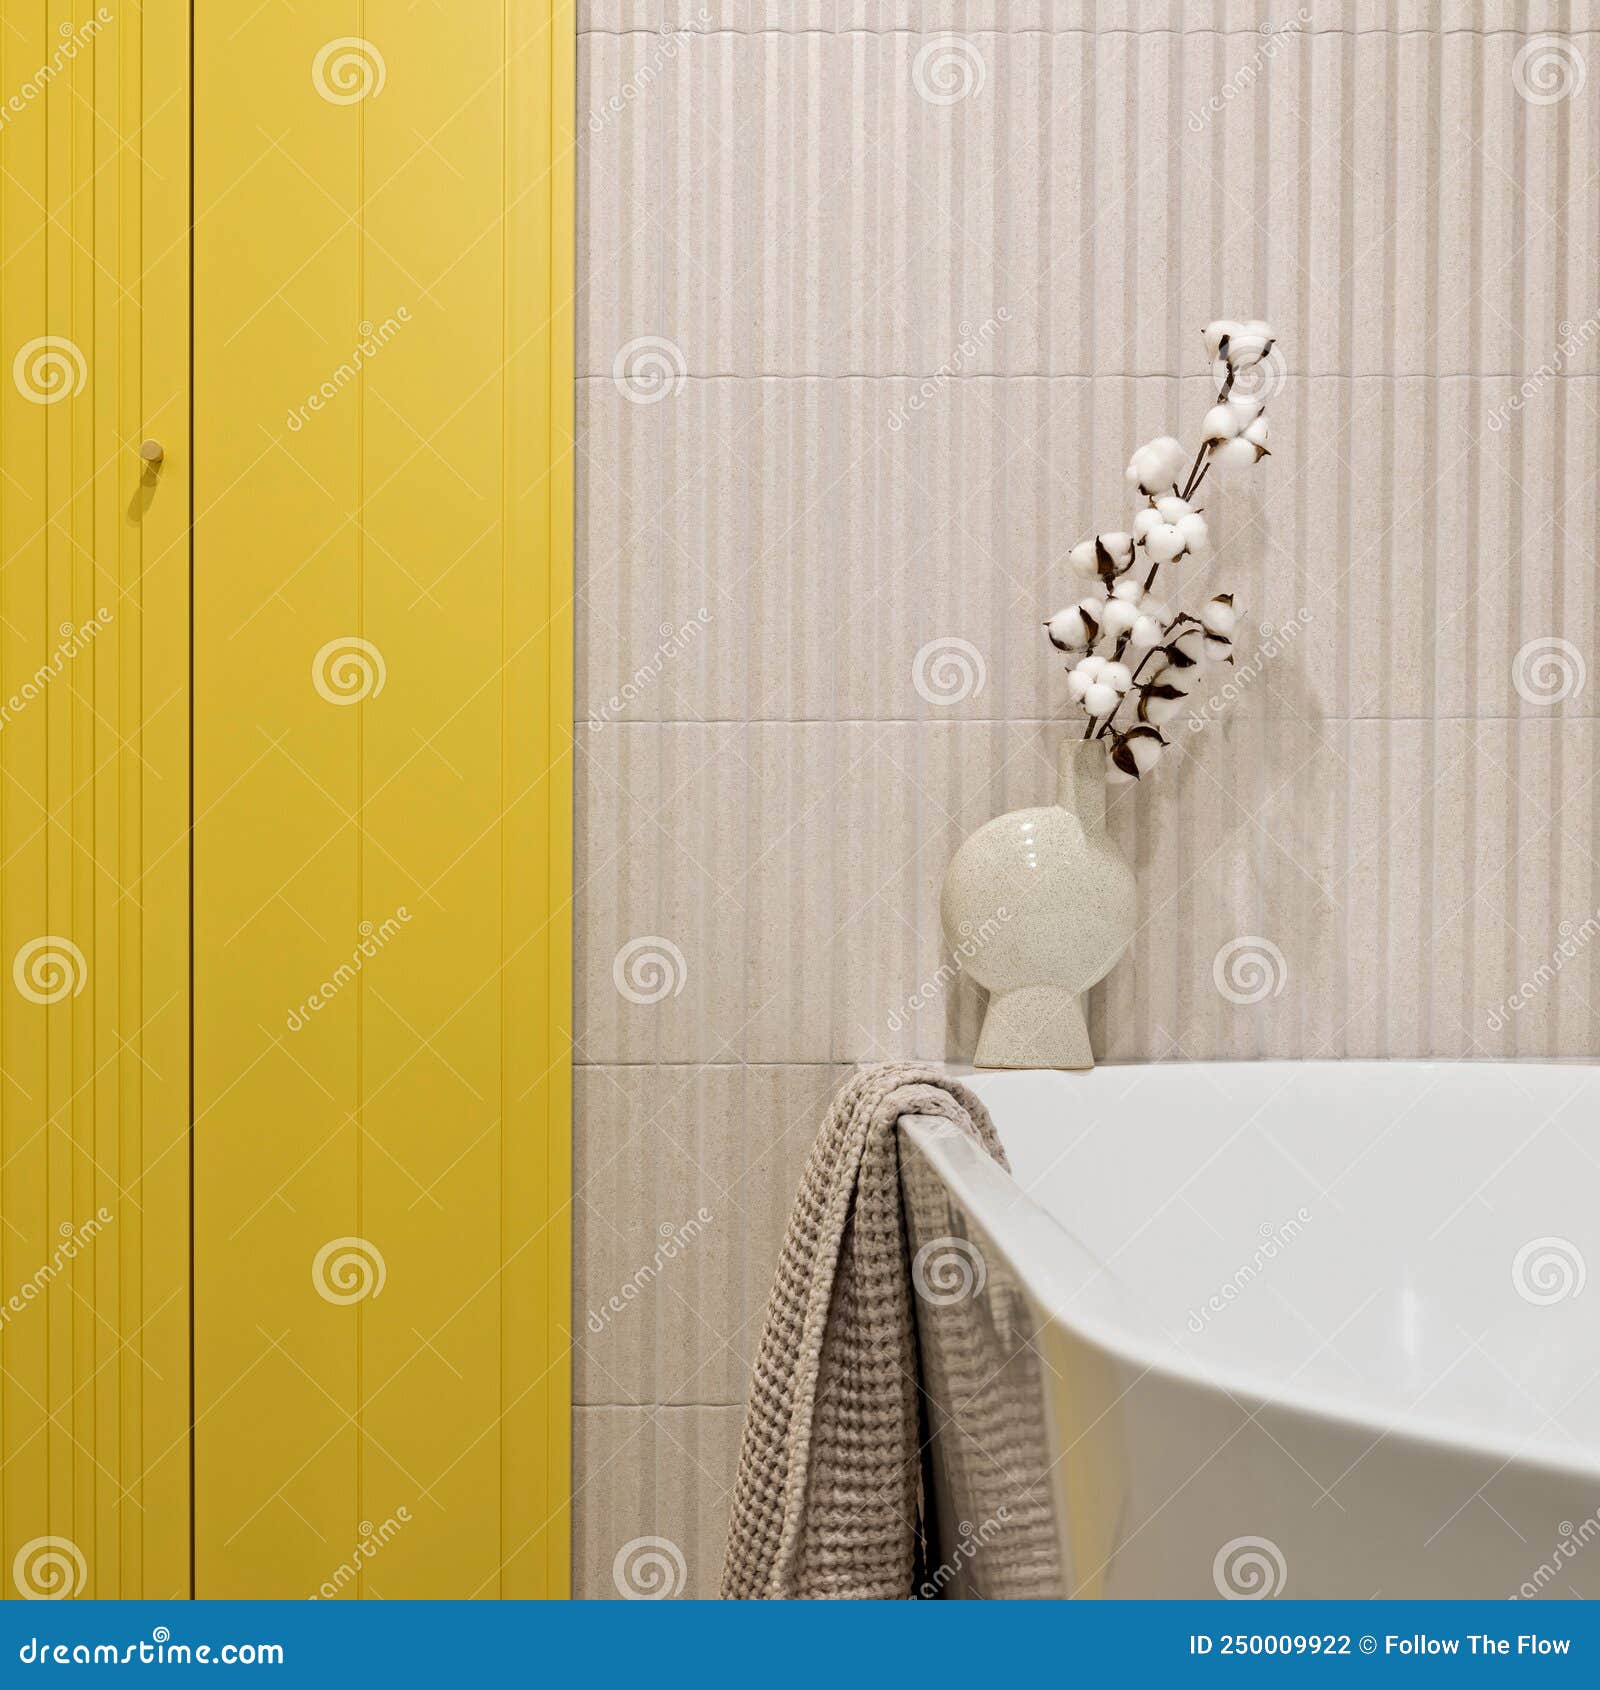 modern bright and yellow bathroom with lamella wall. big white bath with brown towel and dried flowers